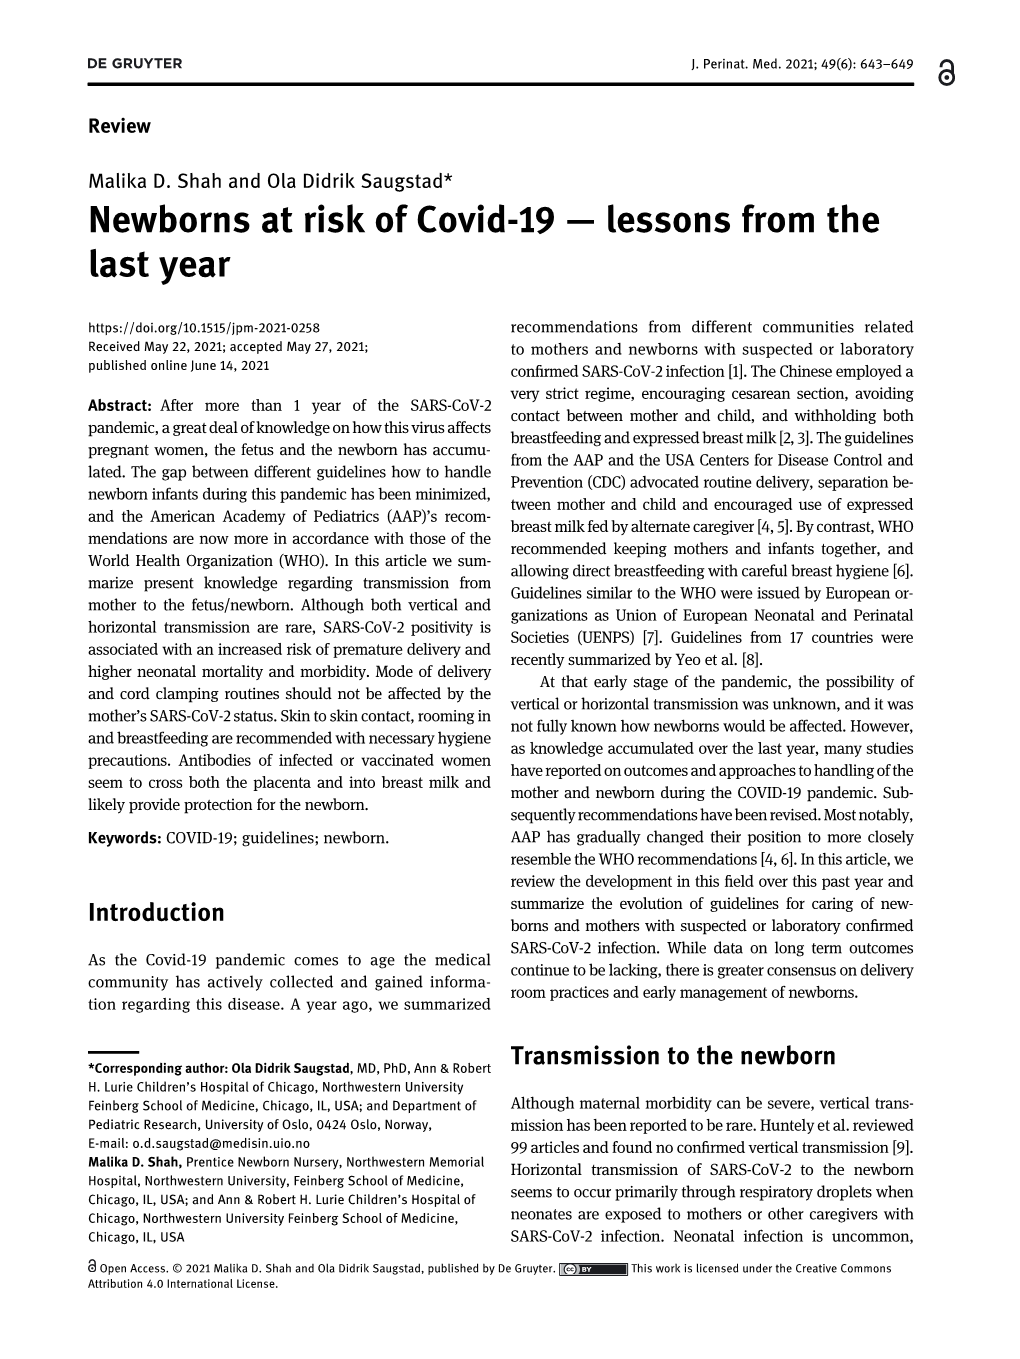 Newborns at Risk of Covid-19―Lessons from the Last Year